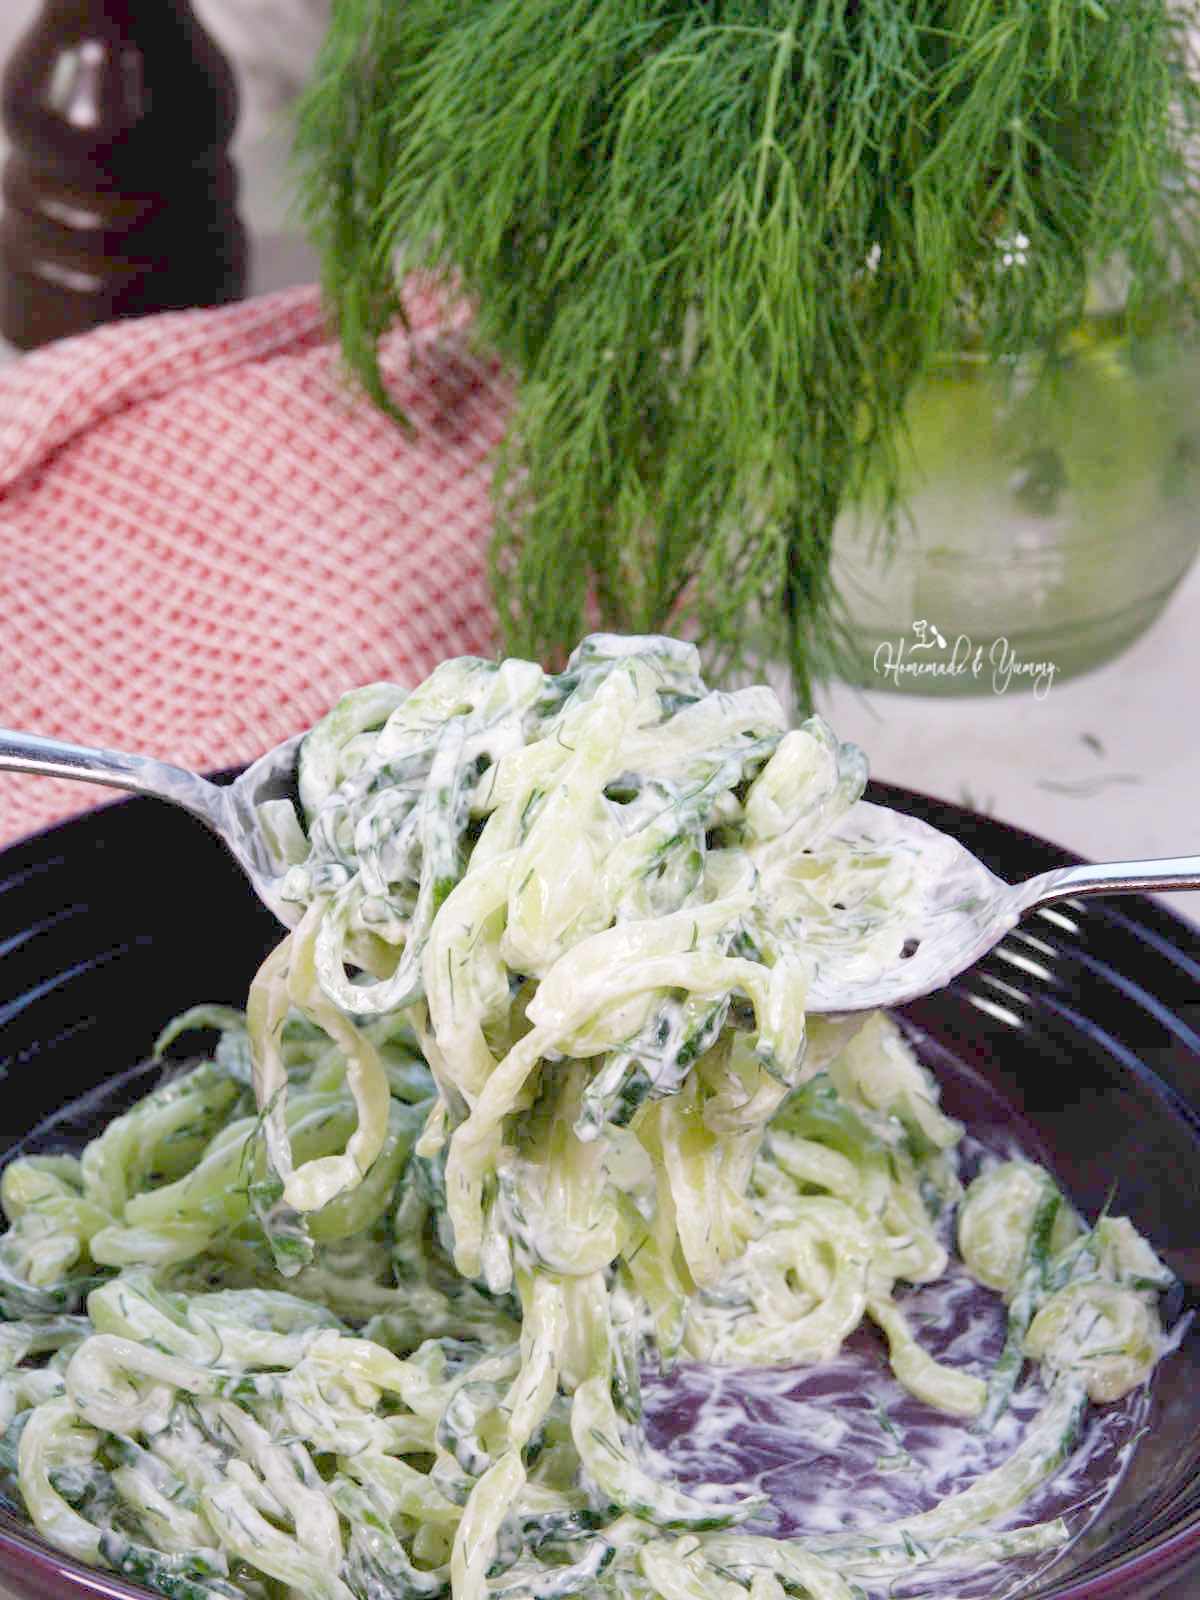 Mixing the dressing on the cucumber noodles.